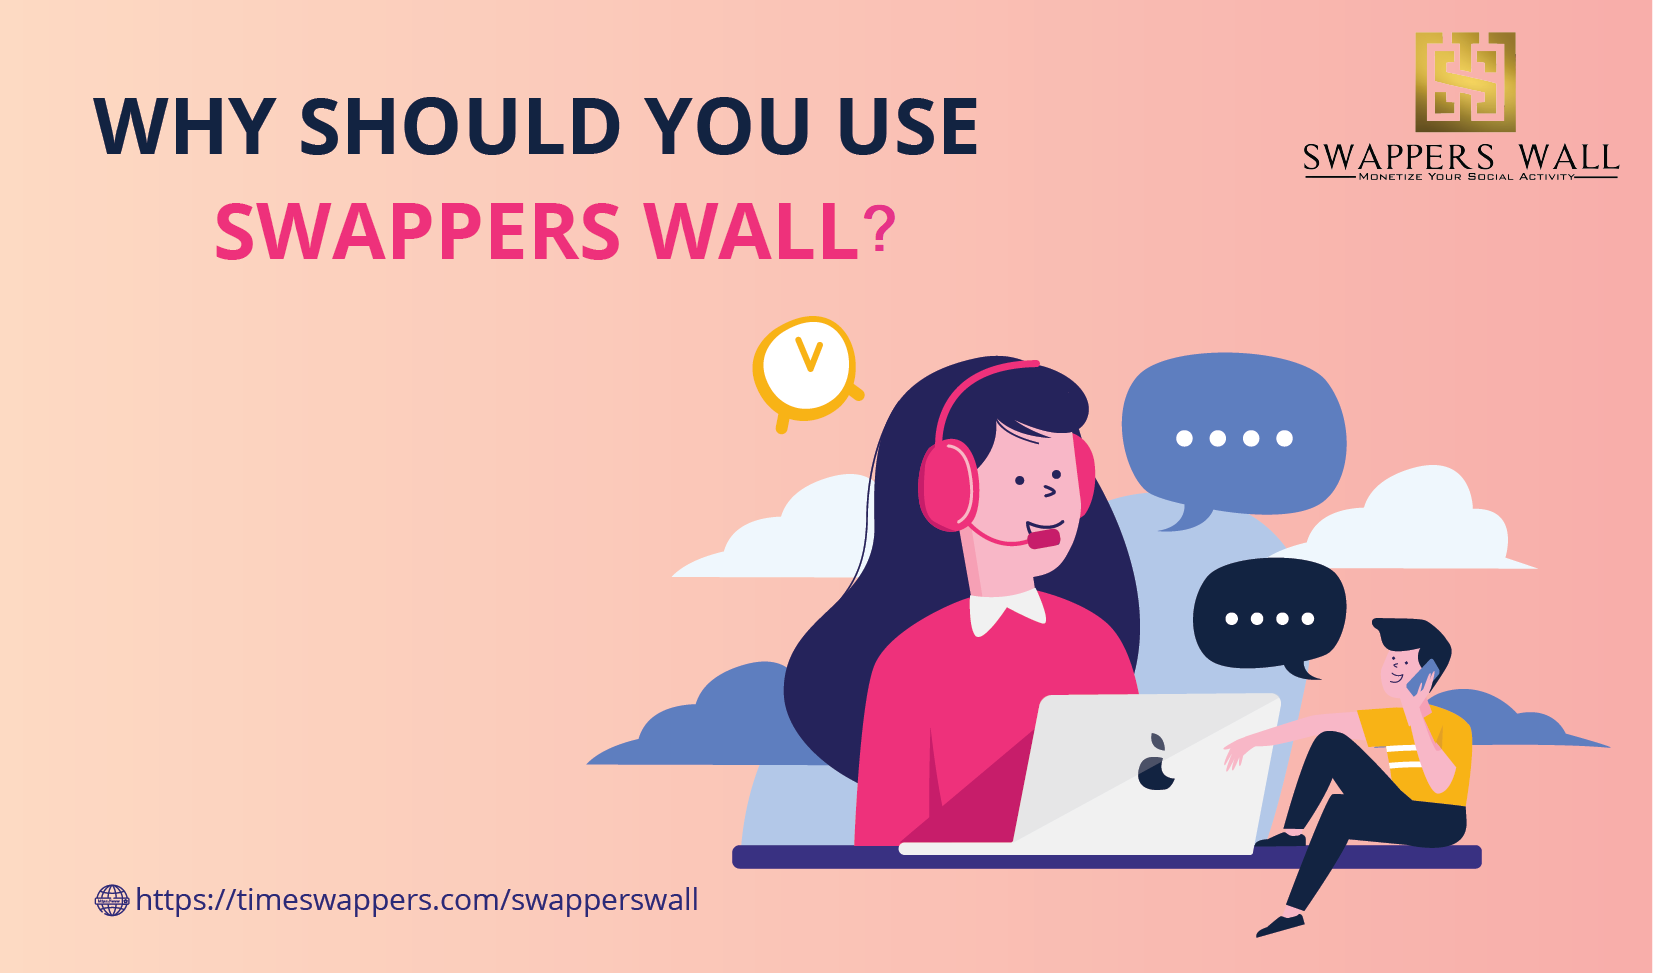 Swappers wall is a social networking platform